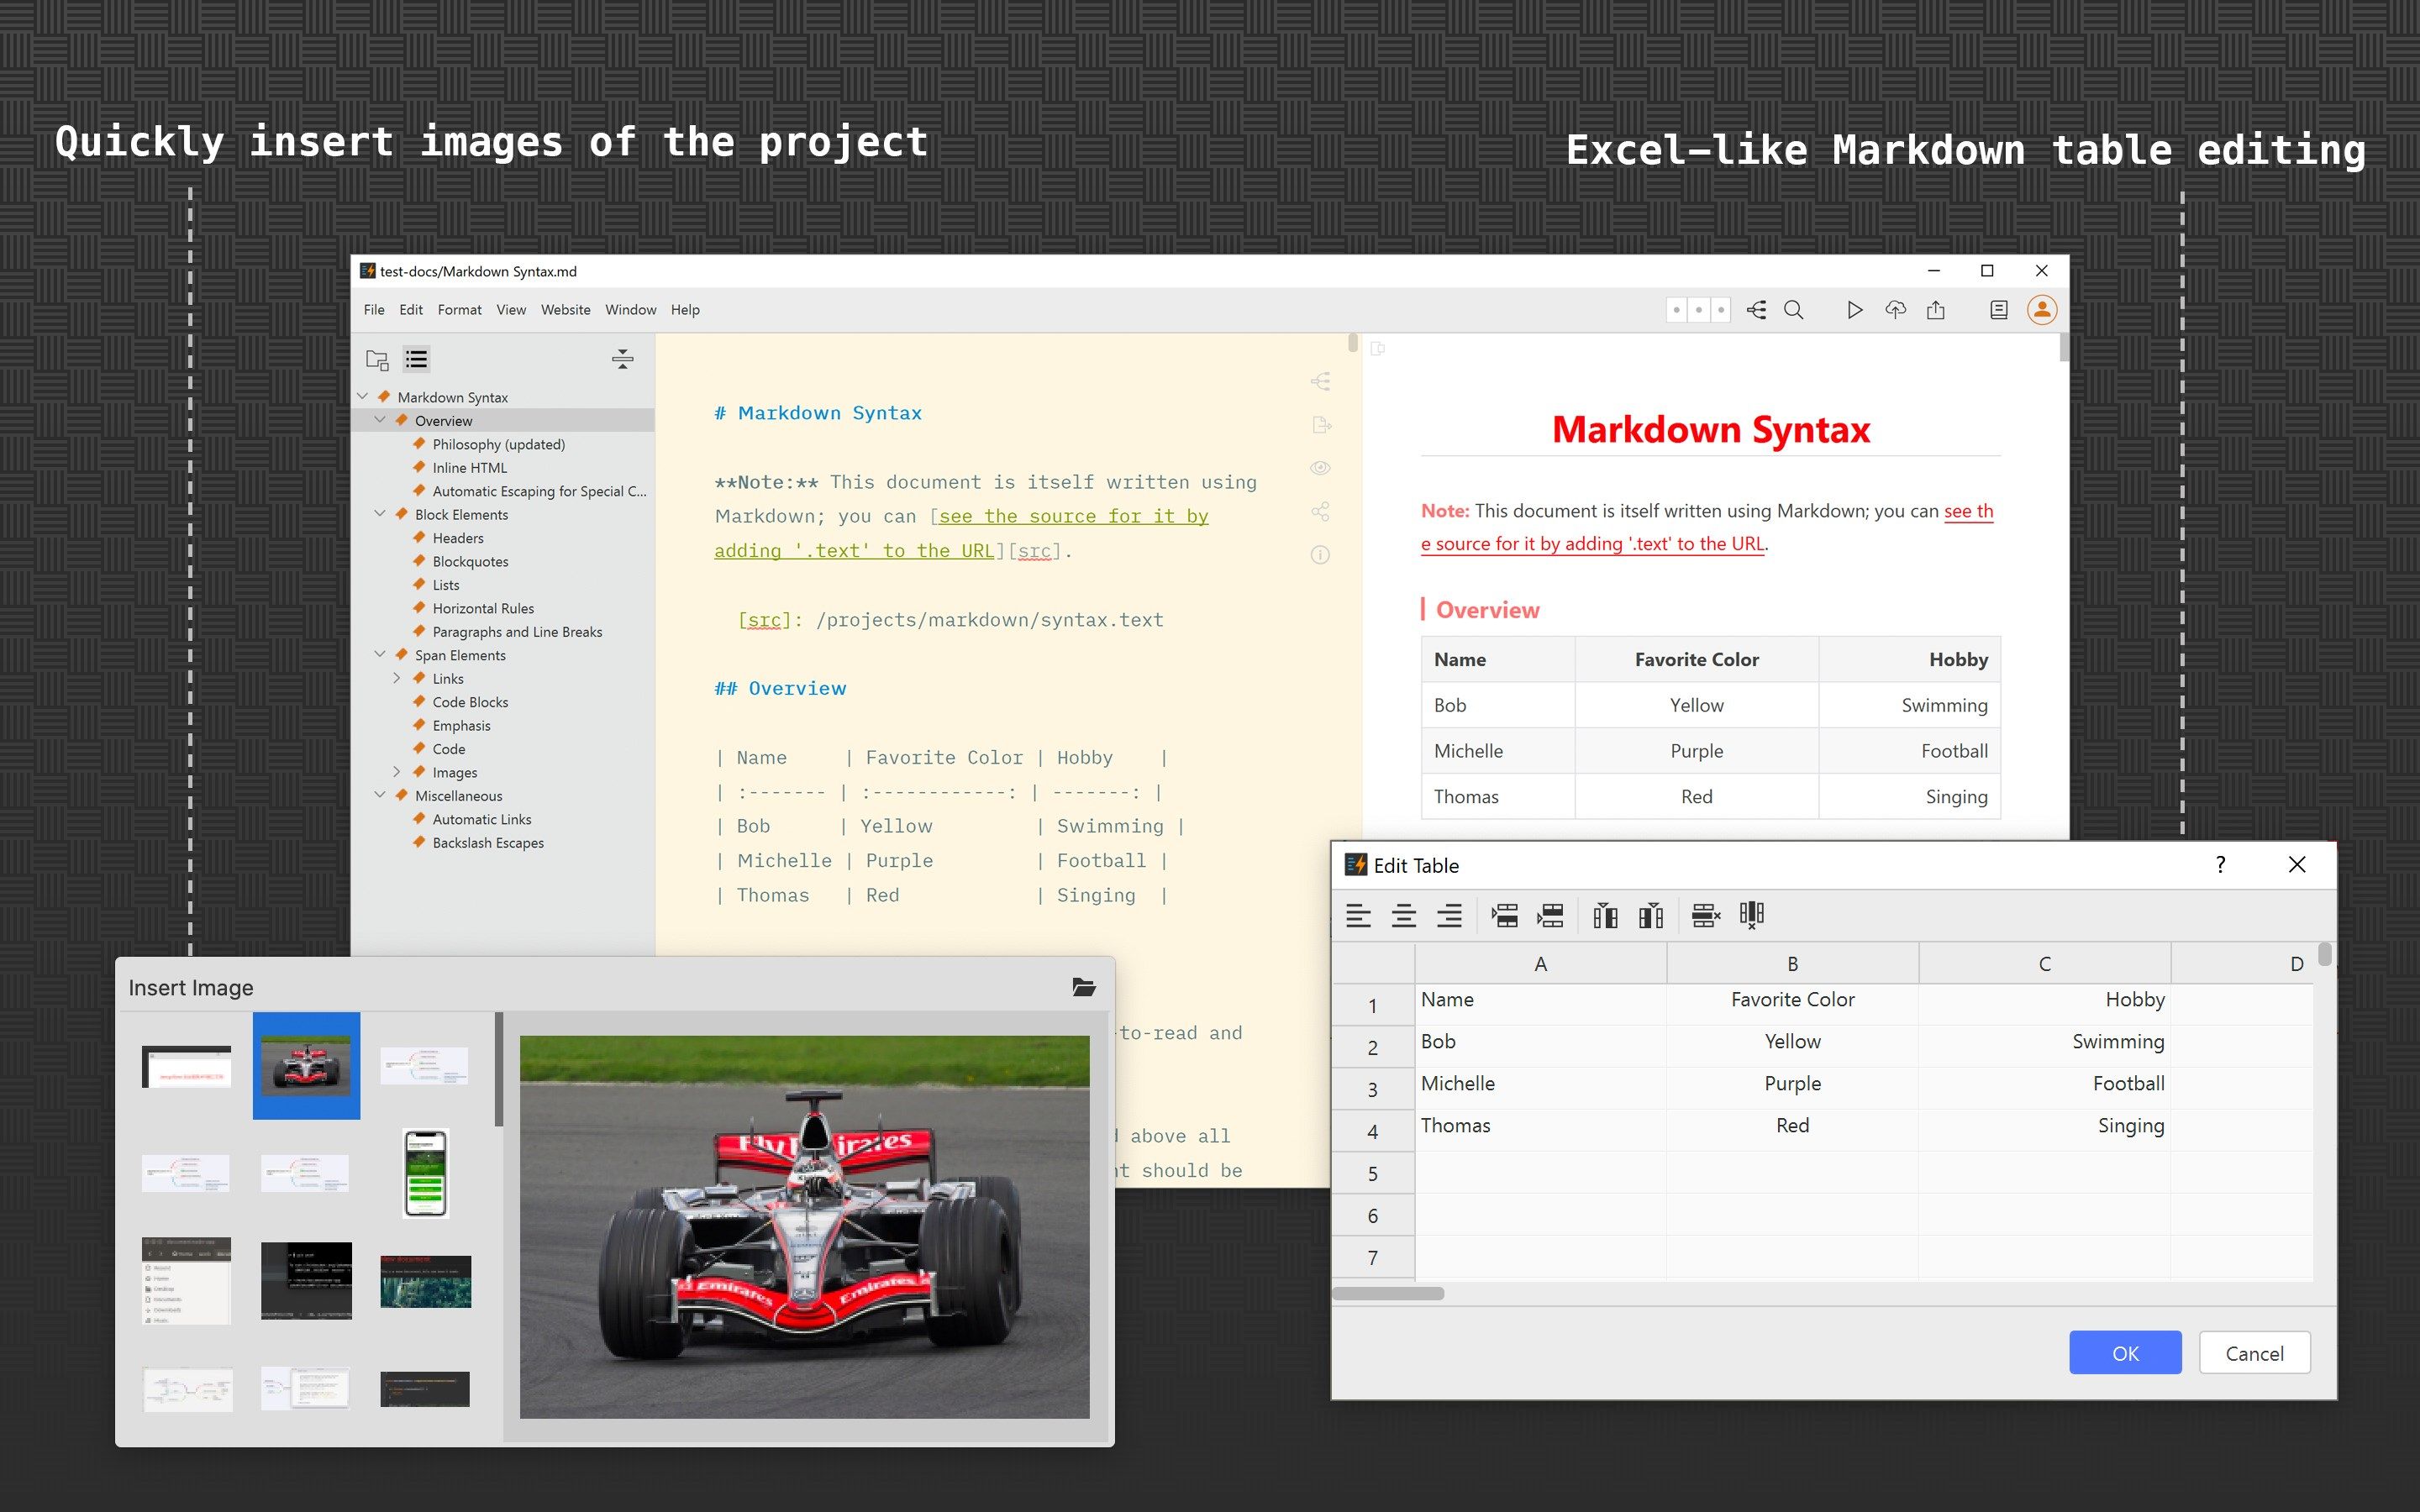 Quickly insert images of the project, excel-like Markdown table editing